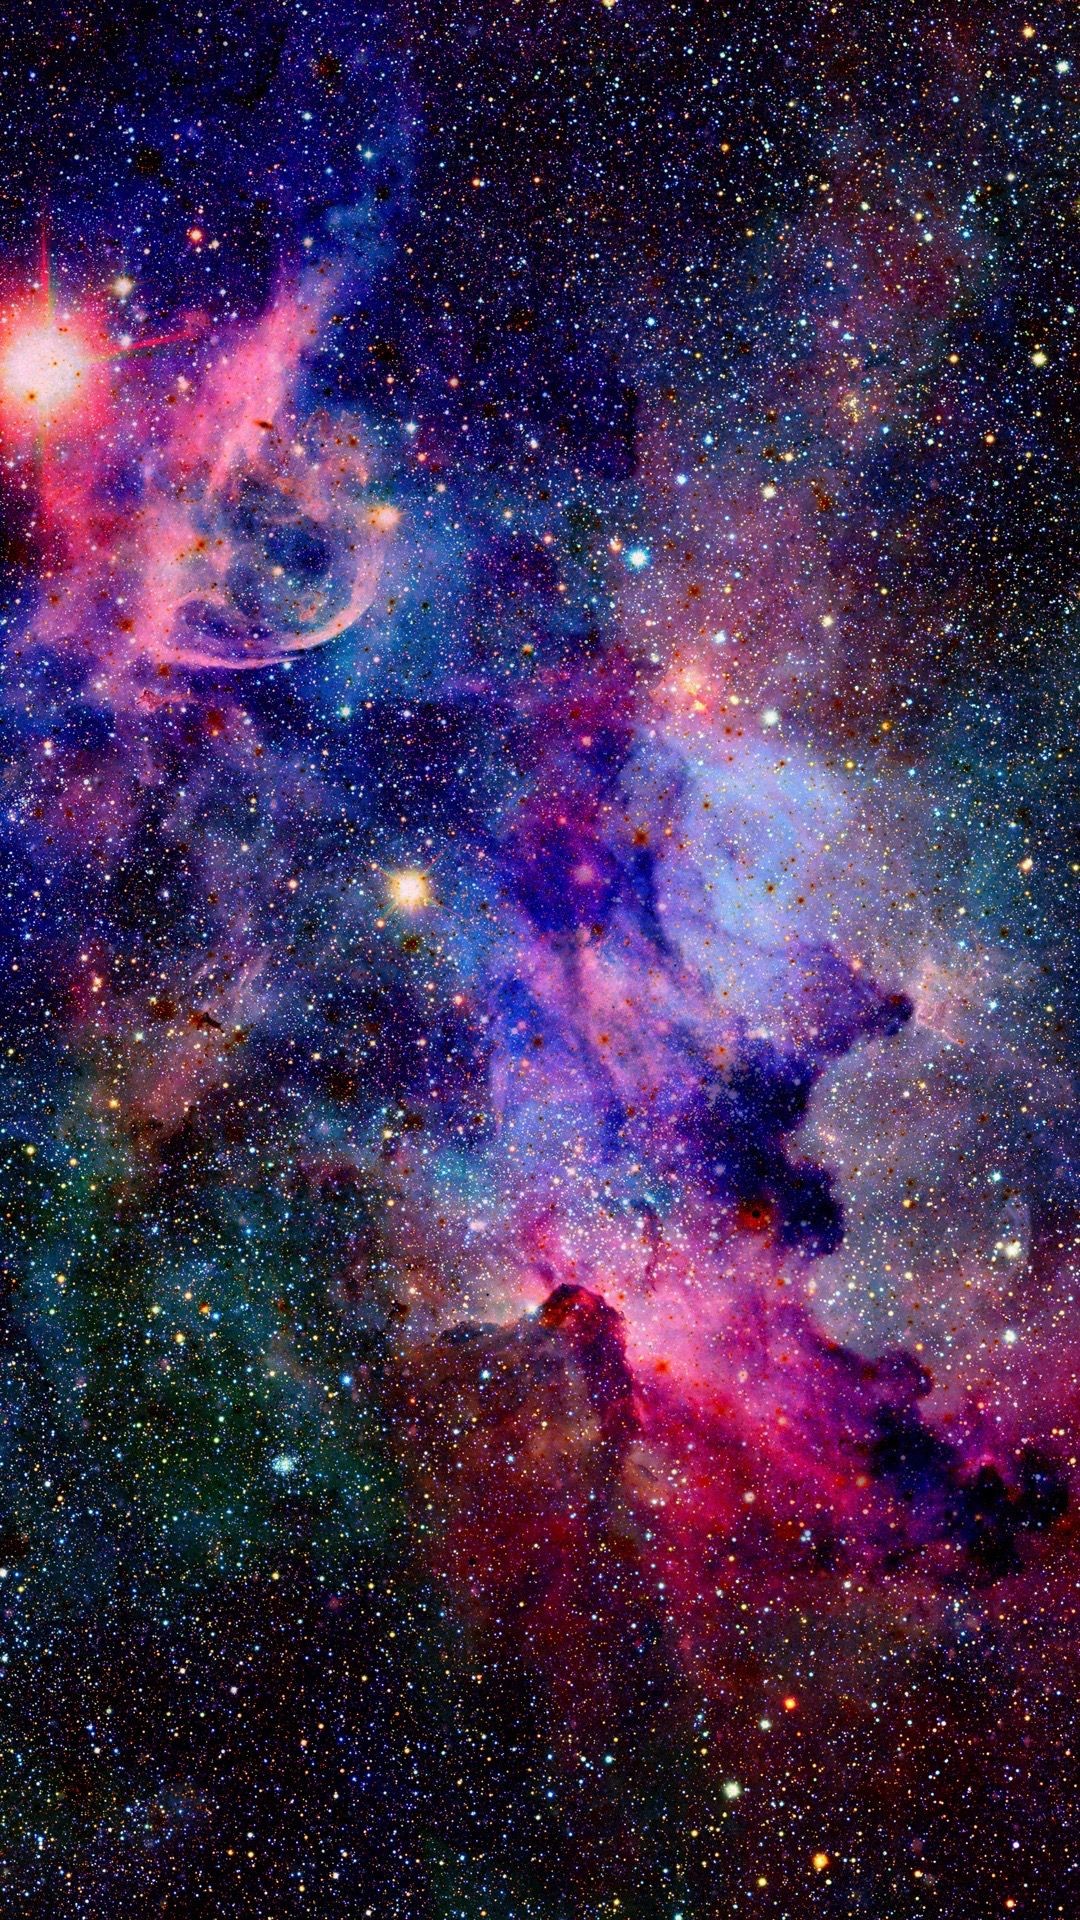 Deep Space Images Wallpaper (71+ images)